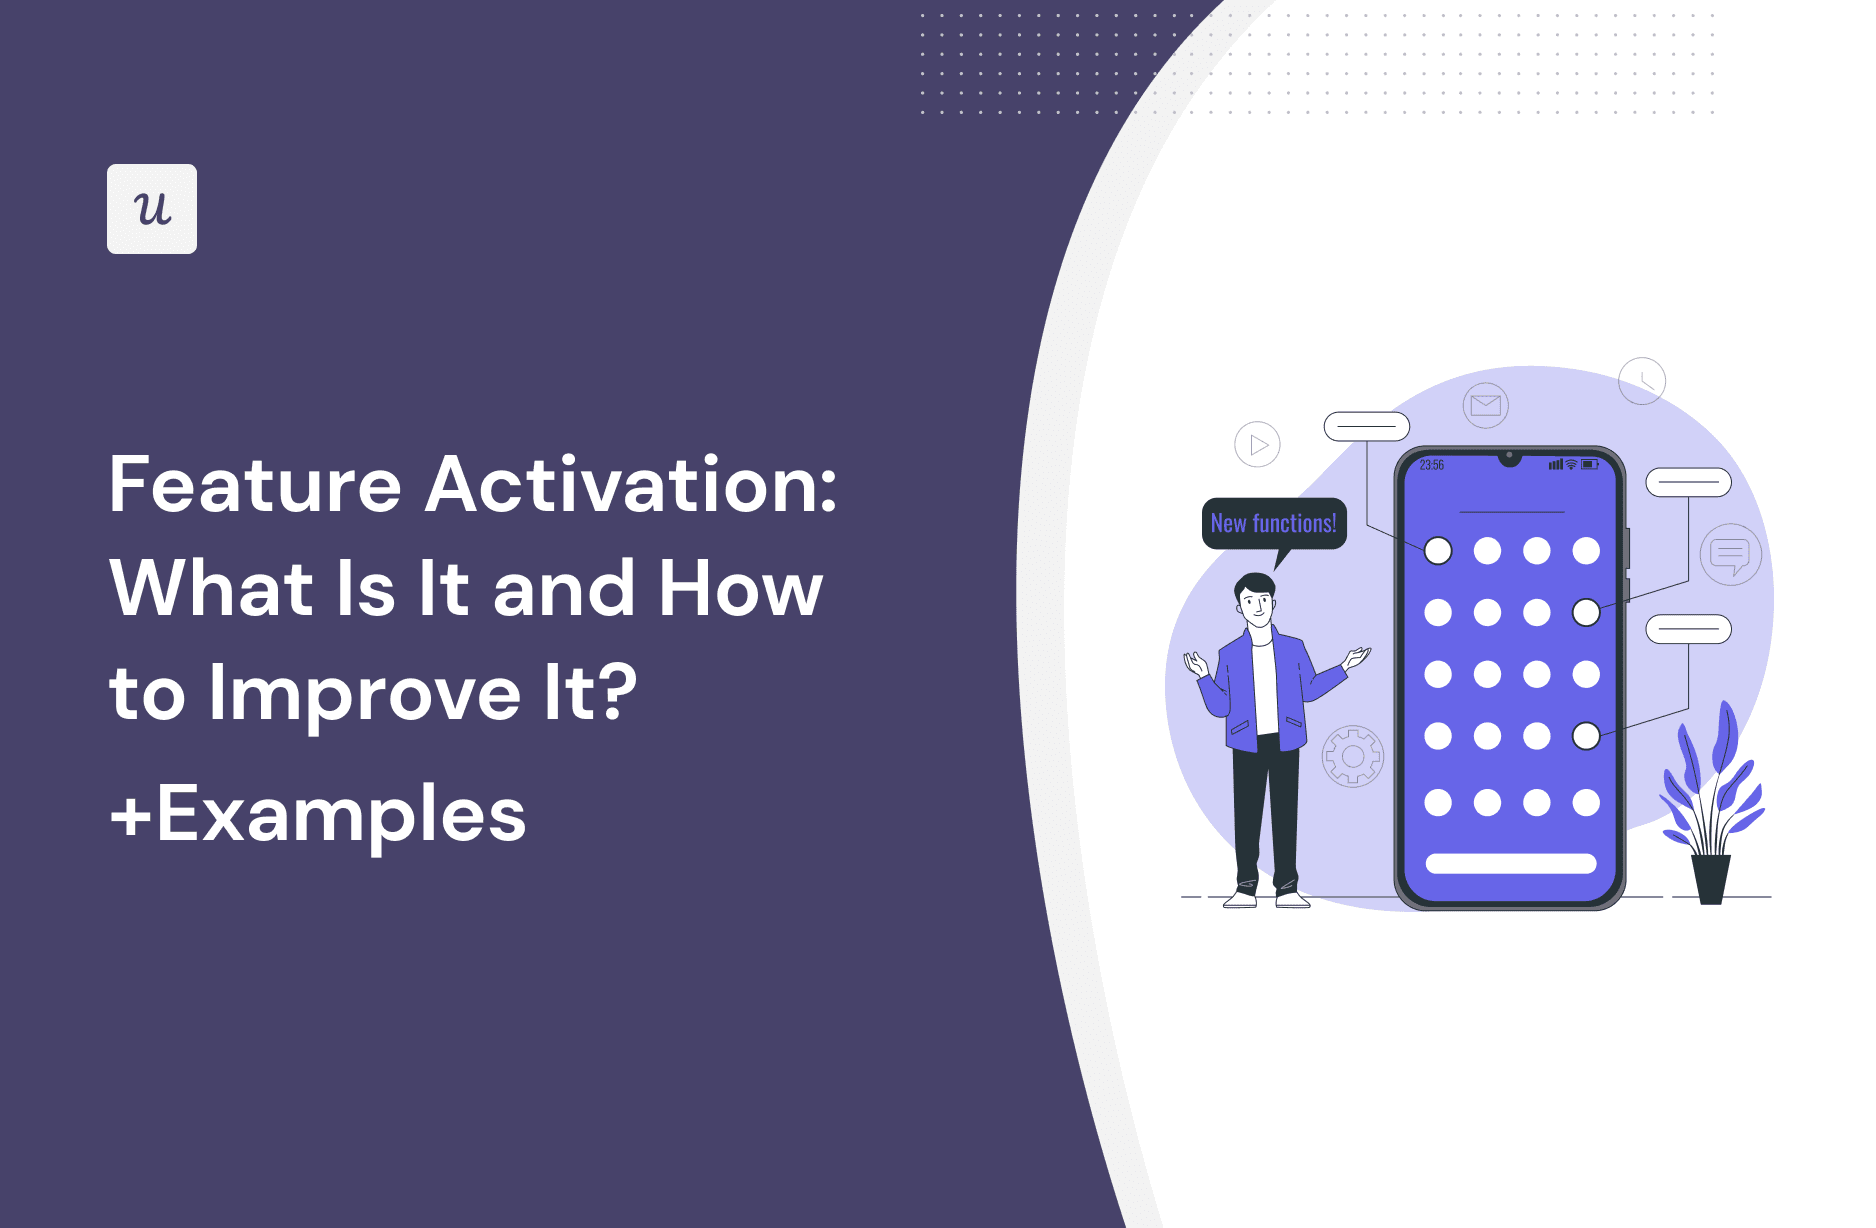 Feature Activation: What Is It and How to Improve It? (+Examples) cover